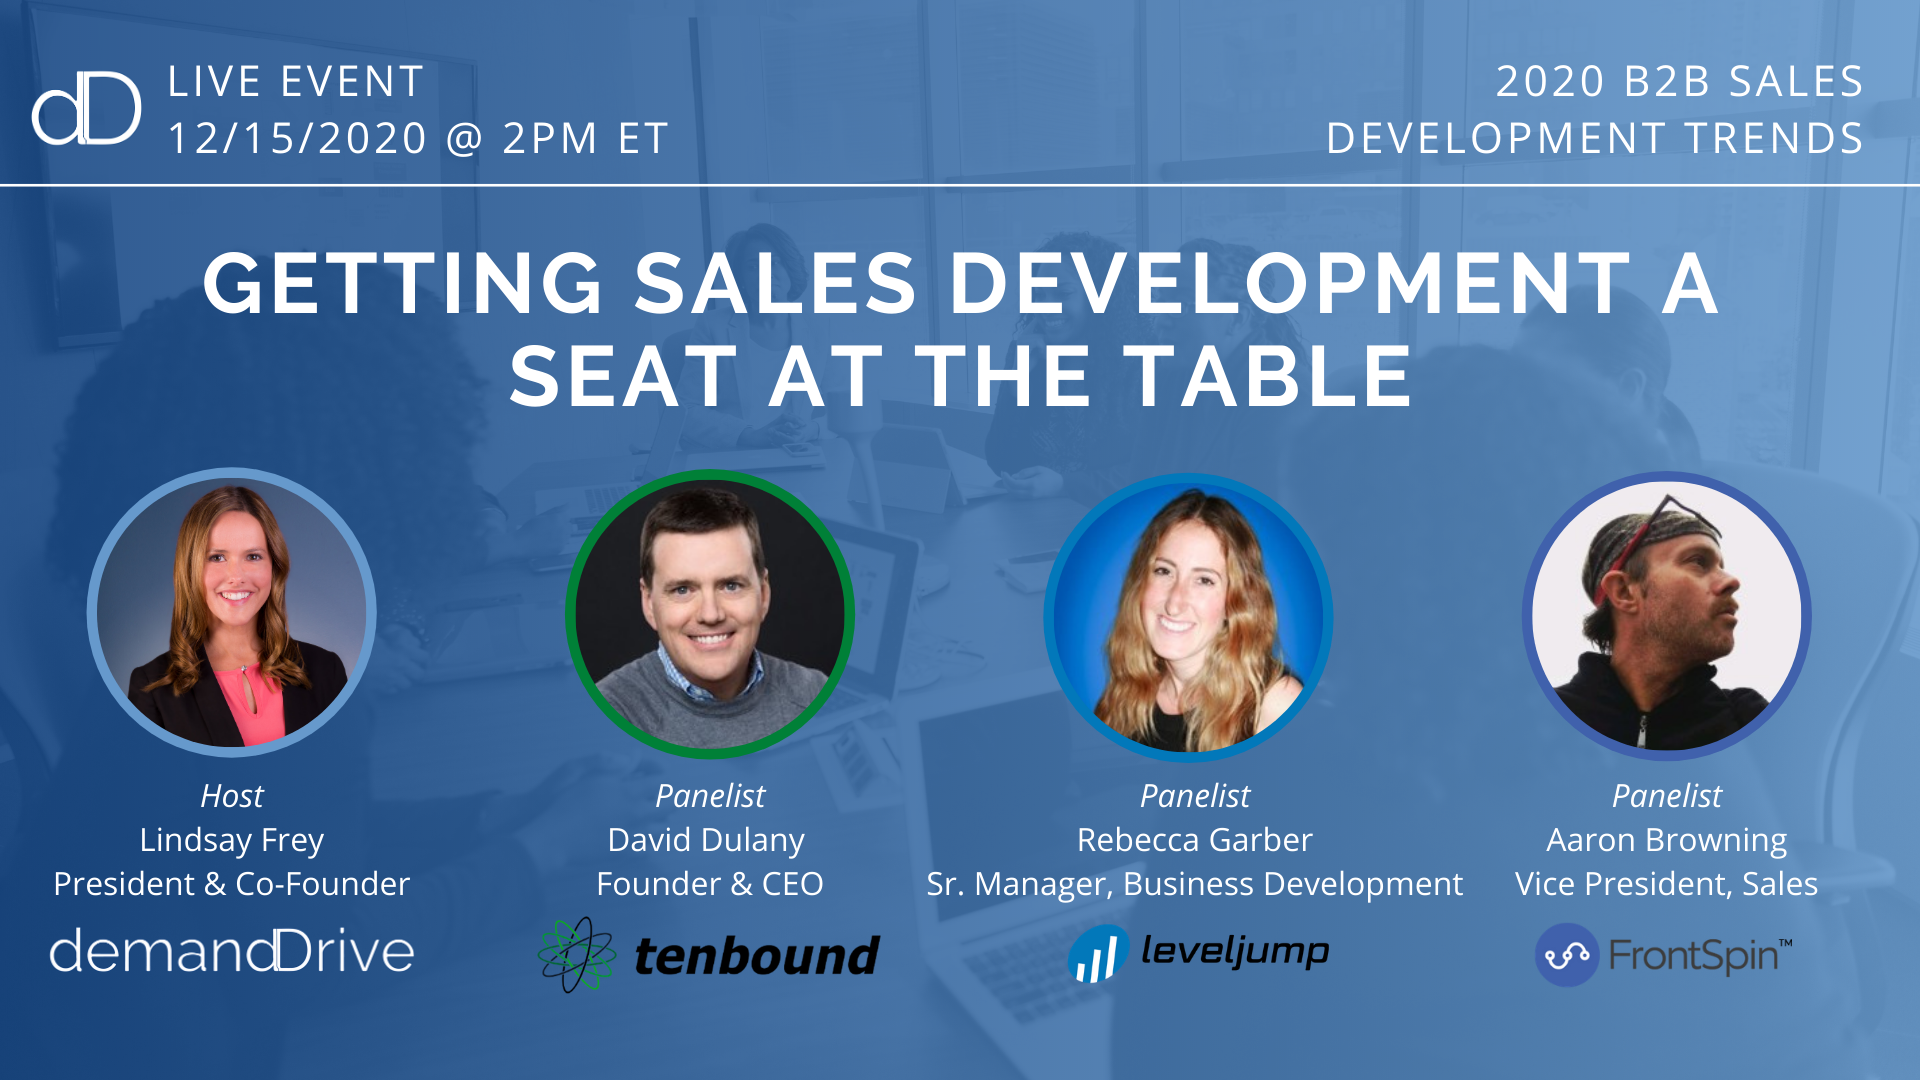 getting sales development a seat at the table - demandDrive round table discussion